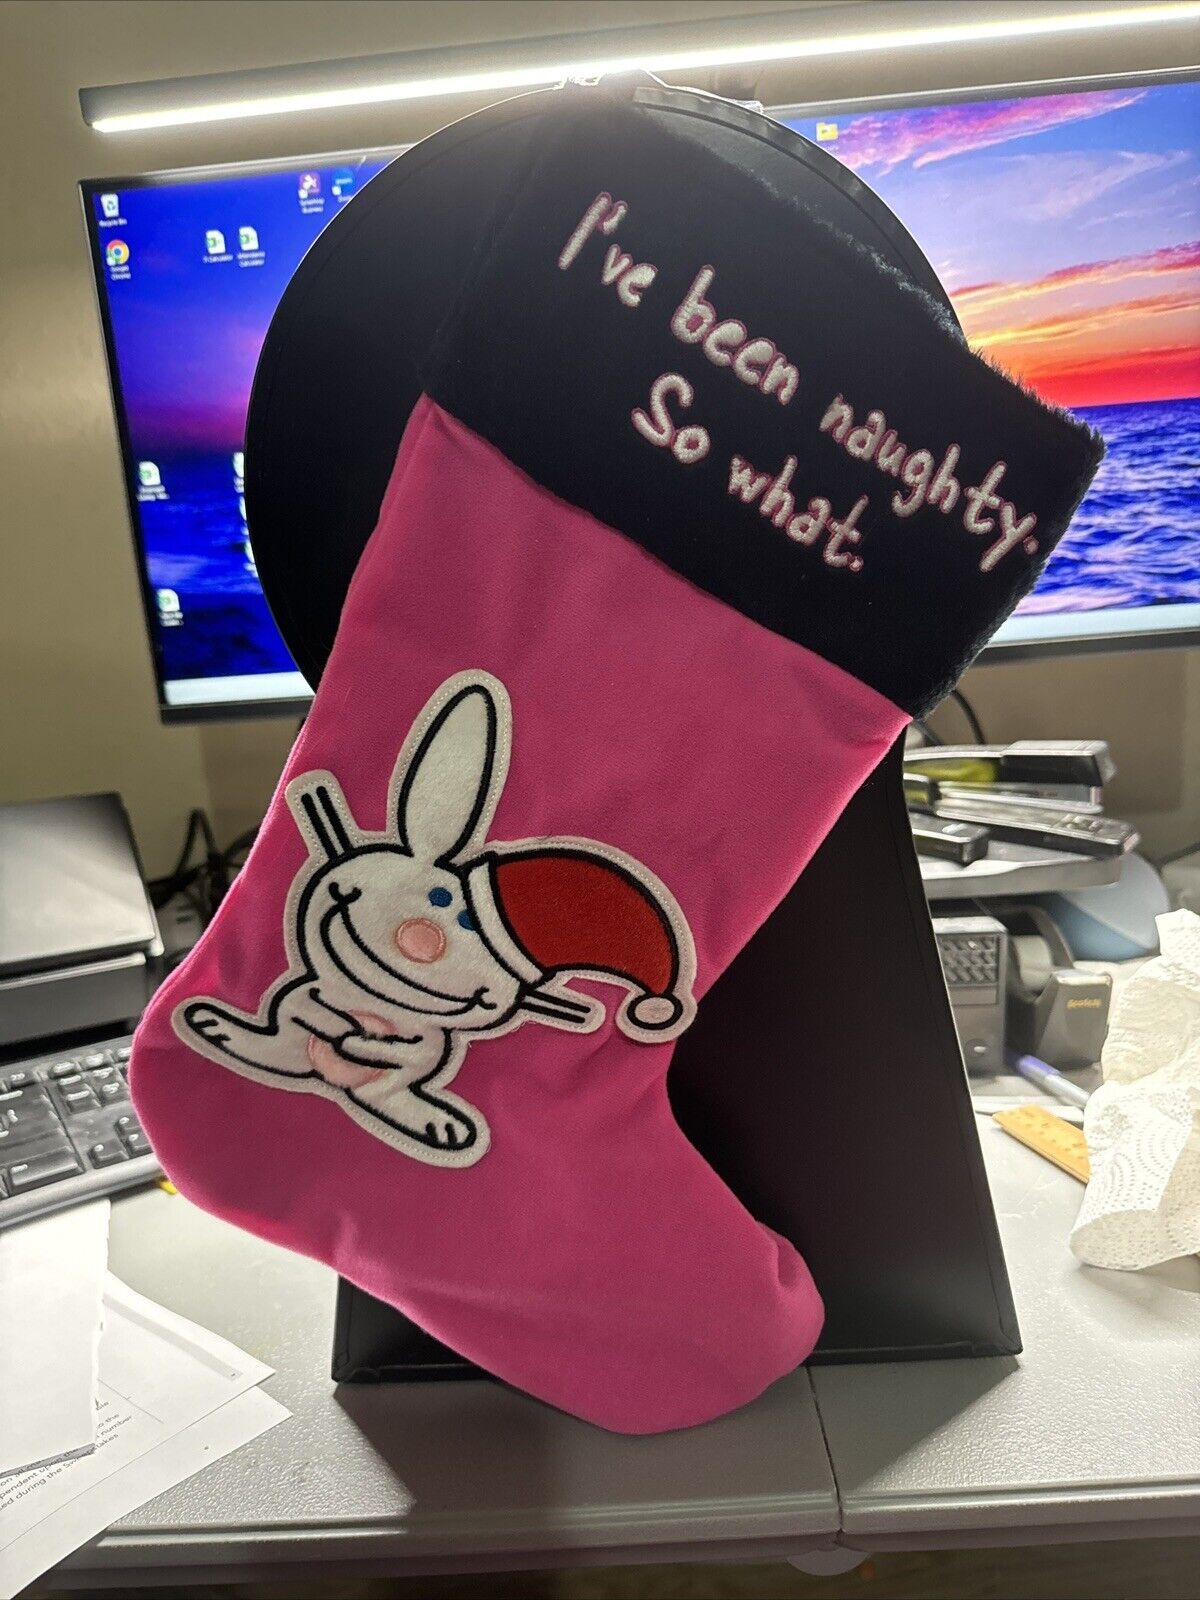 It's Happy Bunny Been Naughty So What Funny Christmas Stocking